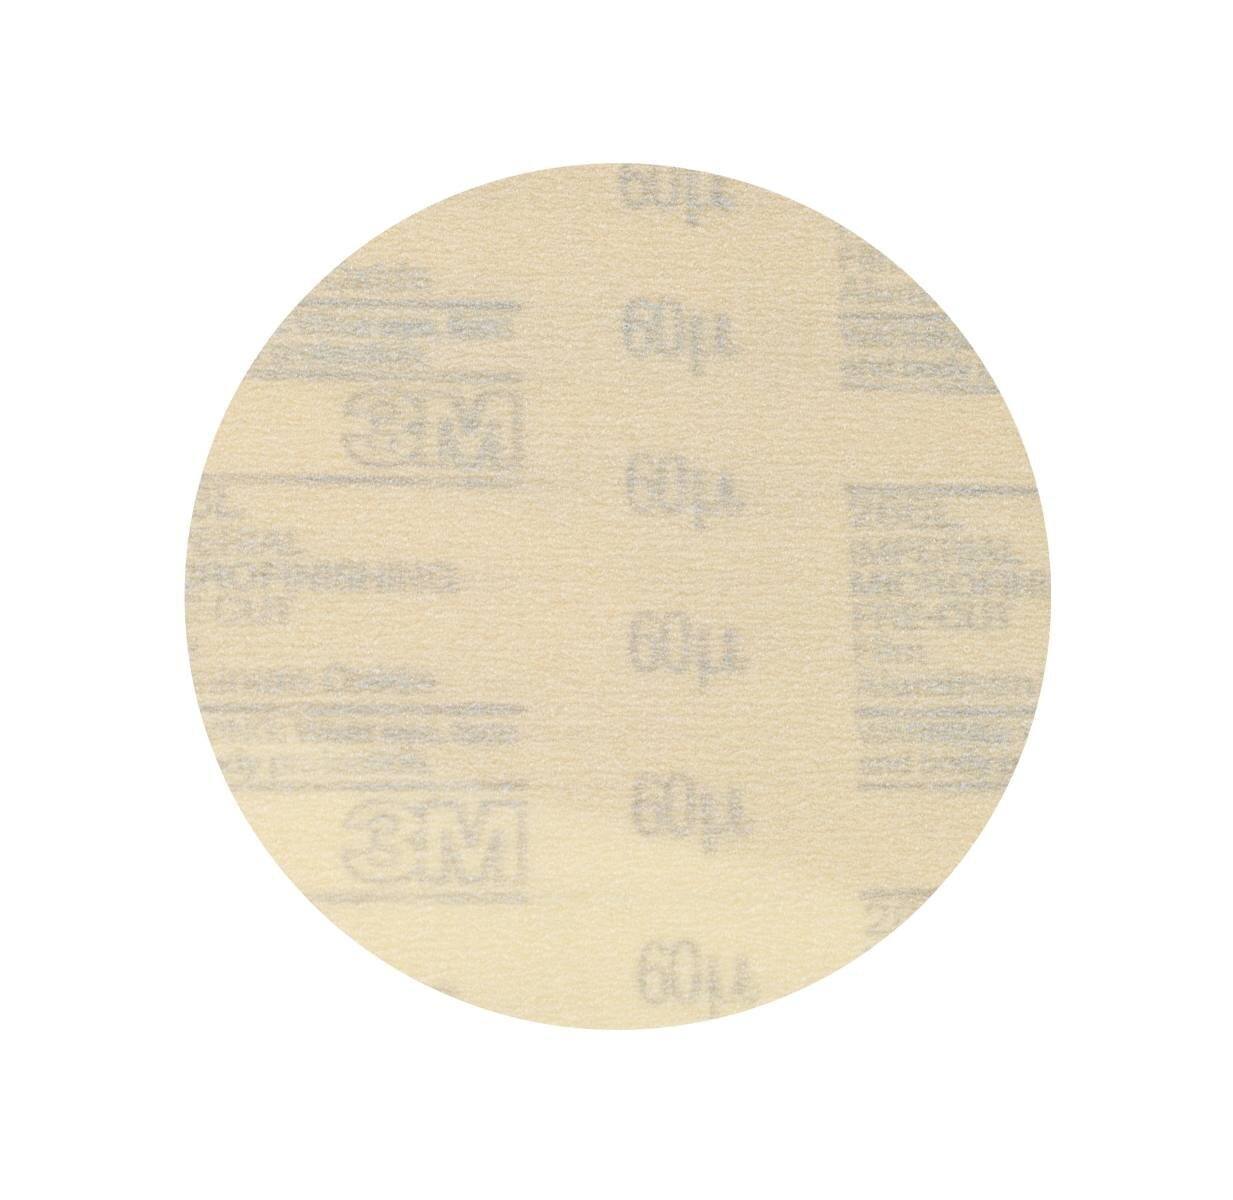 3M Hookit Velcro-backed microfinishing film disc 266L, 150 mm, non-perforated, 30 microns #00047